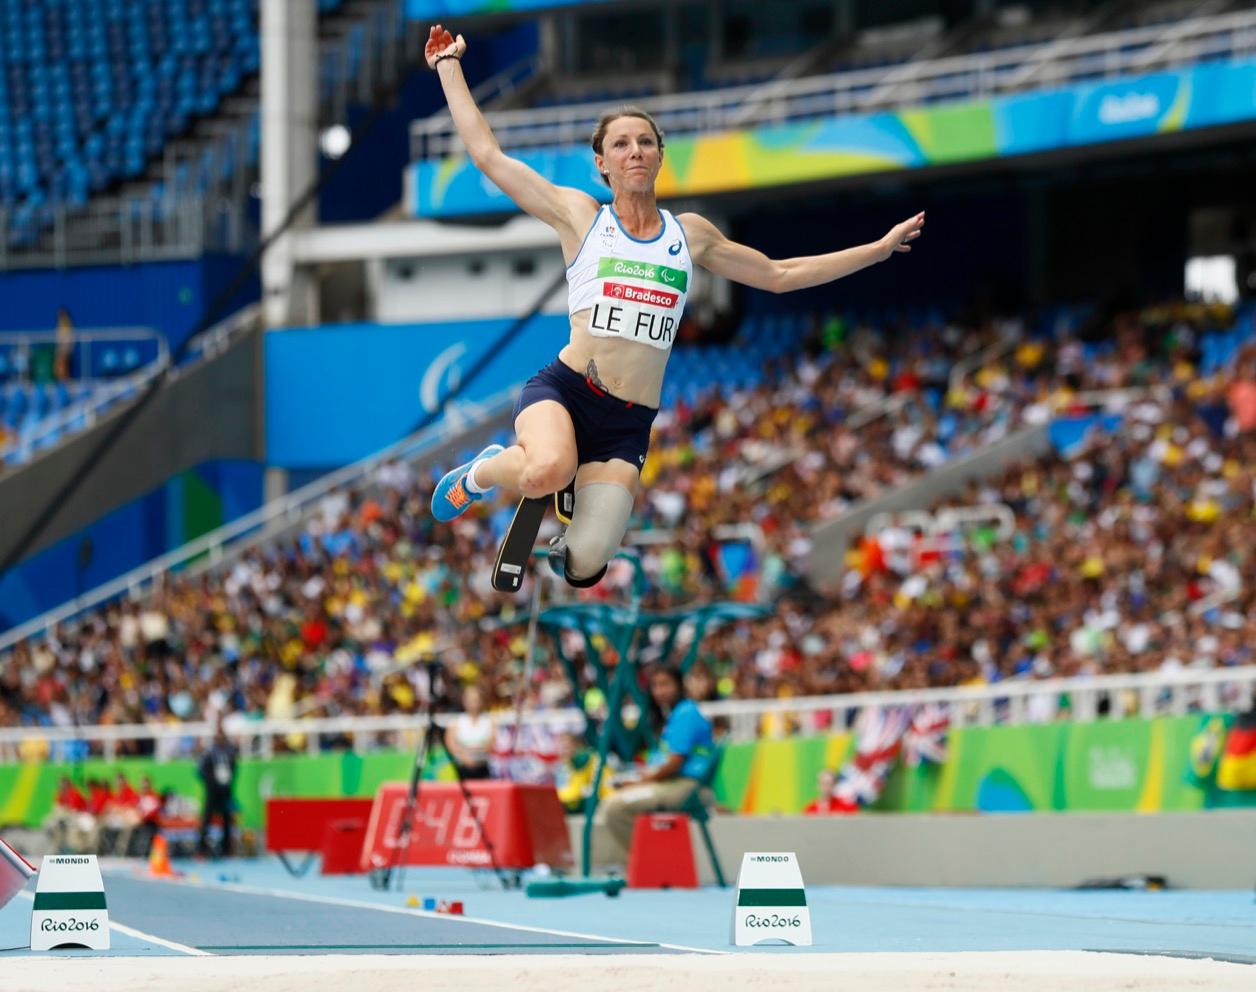 Marie-Amelie le Fur of France competes in the women's long jump on Friday at the 2016 Rio Paralympics.